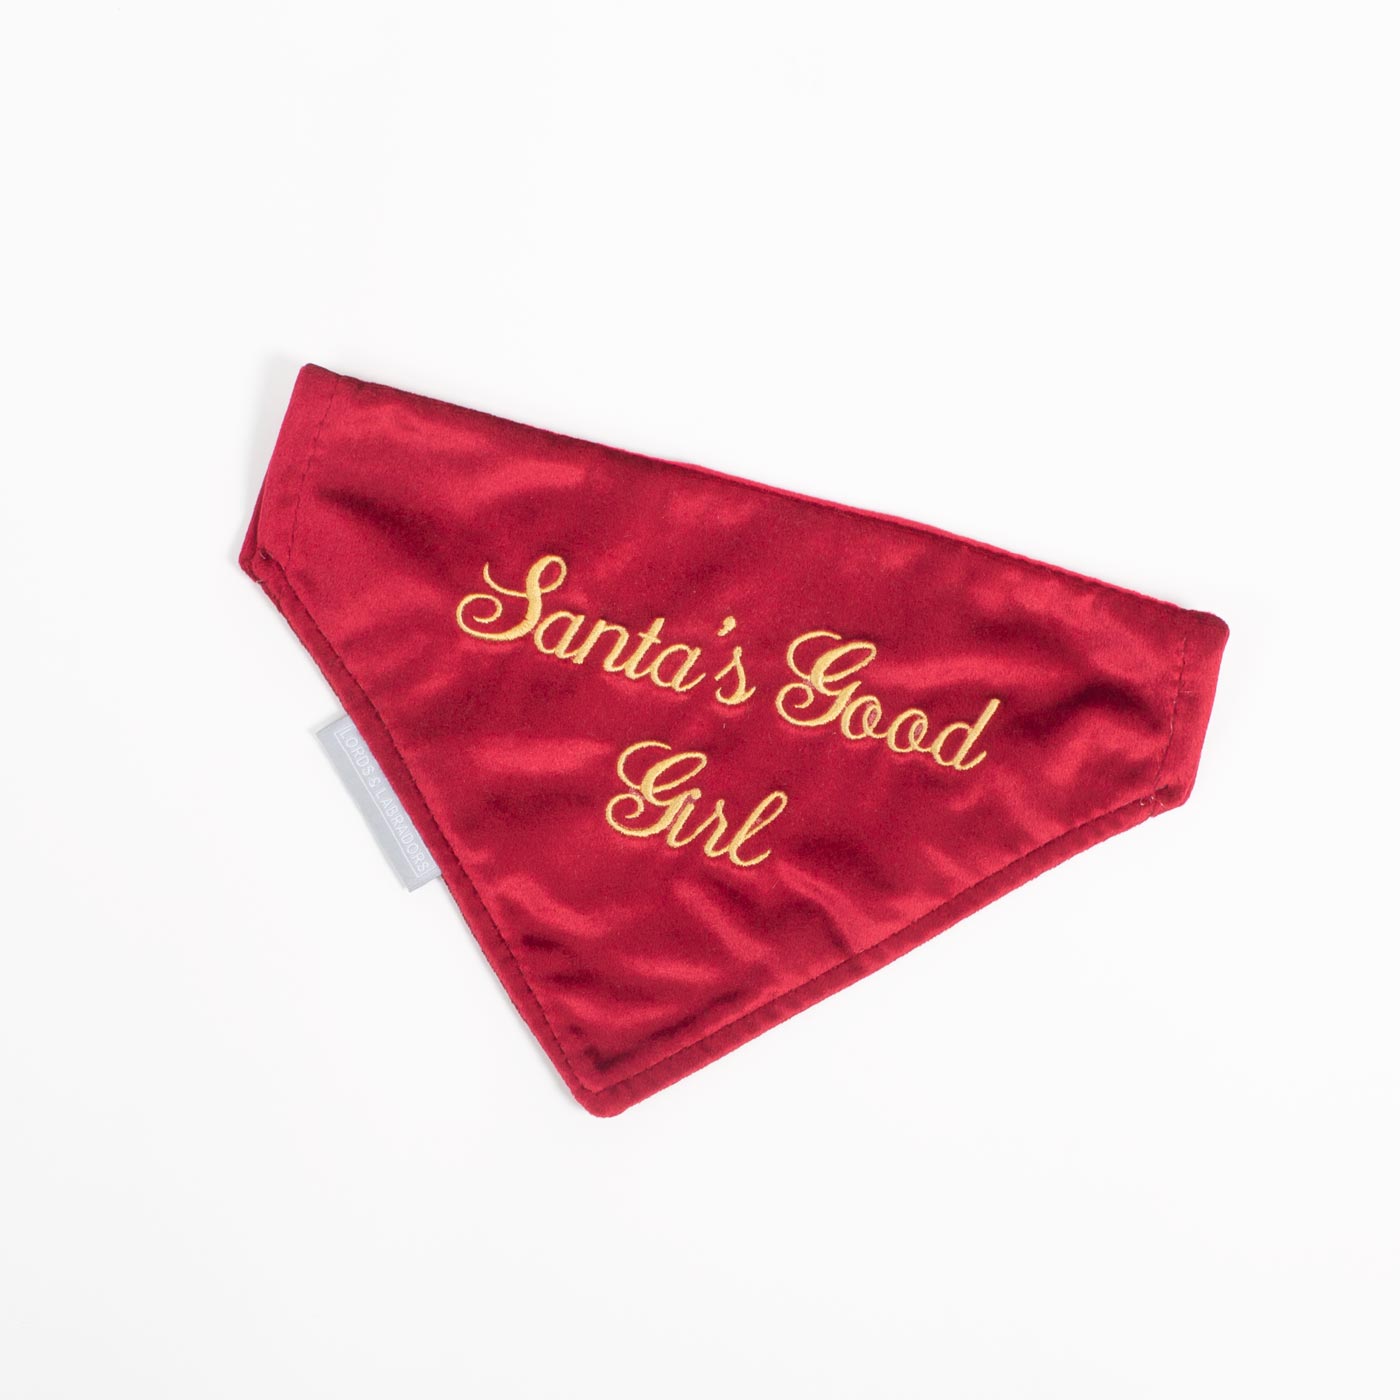 [color:cranberry velvet] Discover The Perfect Bandana For Dogs, ' Santa's Good Girl ' Dog Bandana In Luxury Cranberry Velvet, Available To Now at Lords & Labradors US